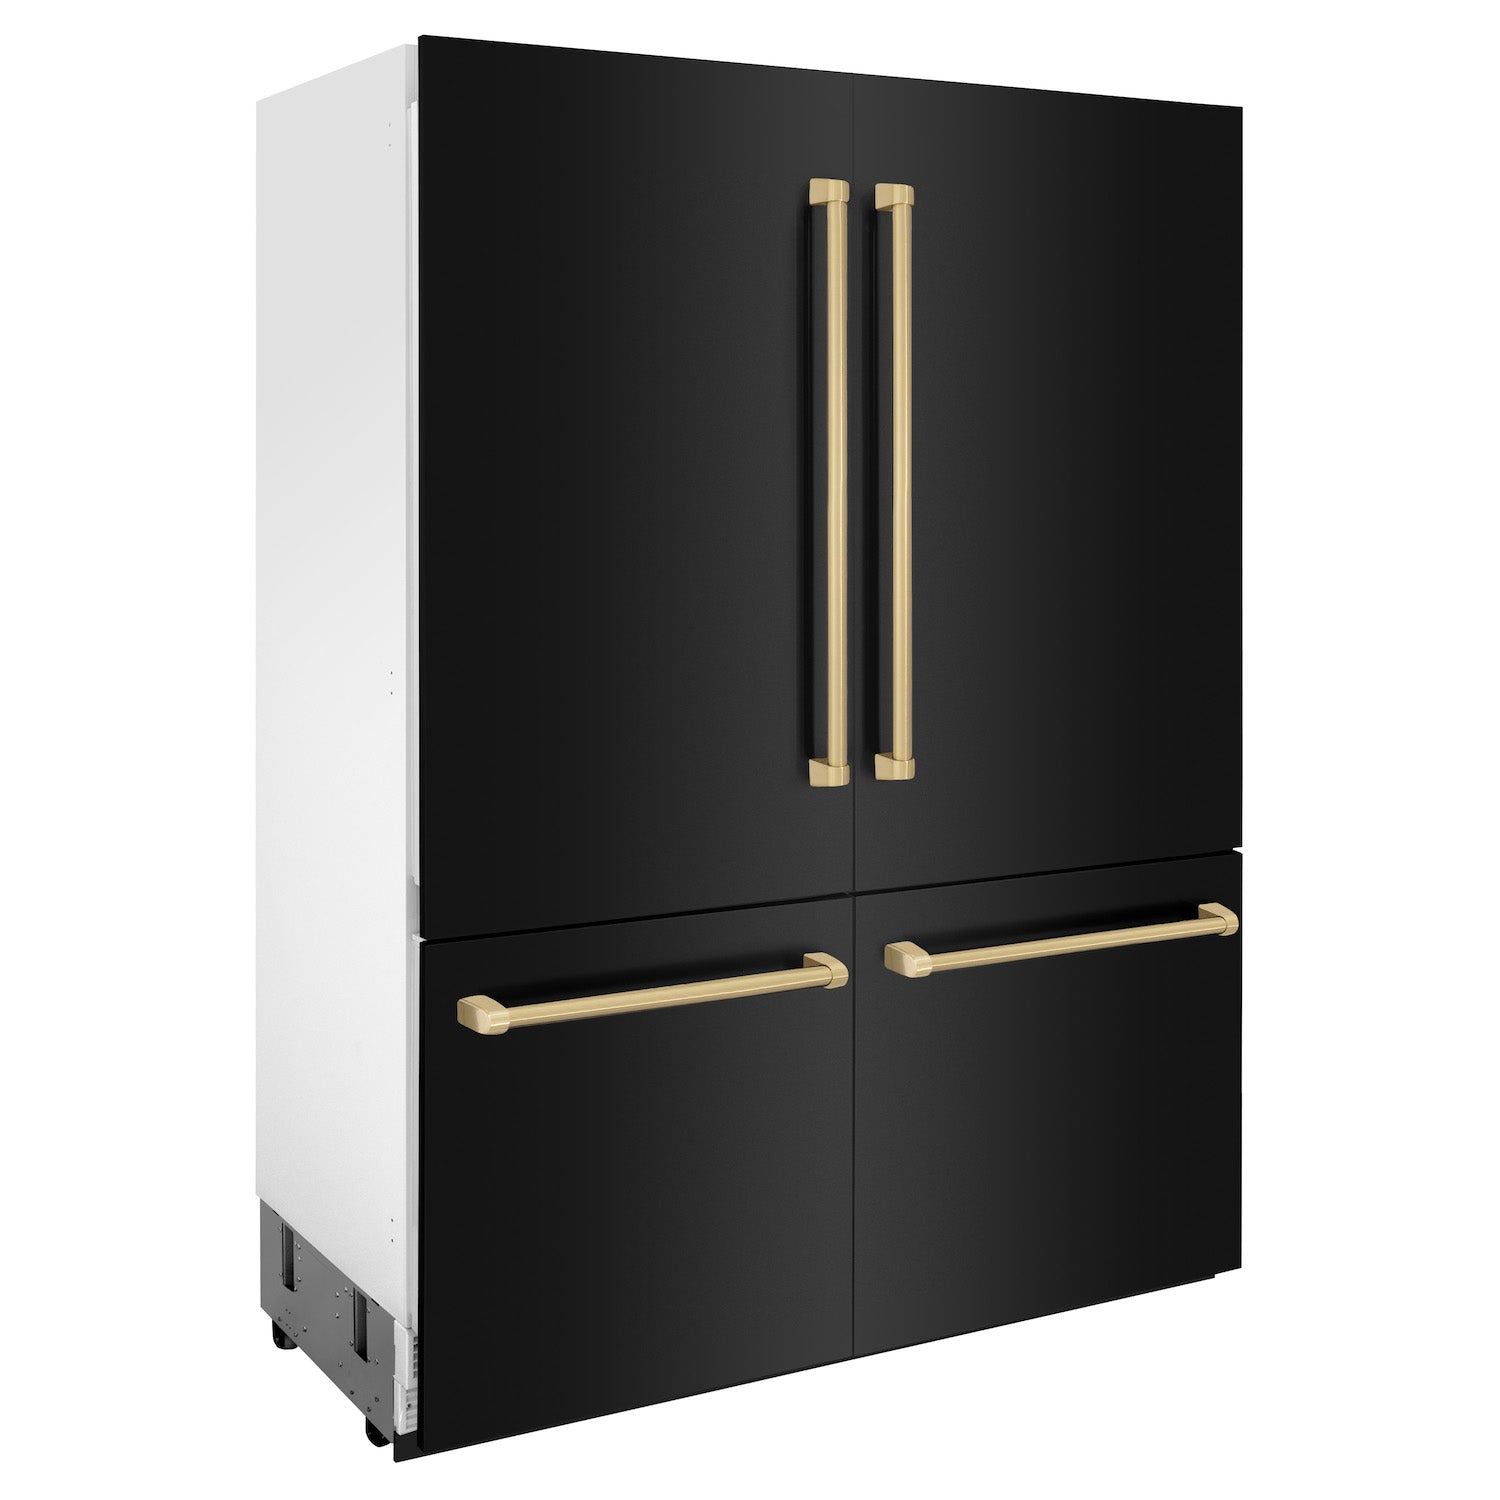 ZLINE Autograph Edition 60 in. 32.2 cu. ft. Built-in 4-Door French Door Refrigerator with Internal Water and Ice Dispenser in Black Stainless Steel with Champagne Bronze Accents (RBIVZ-BS-60-CB) side, closed.